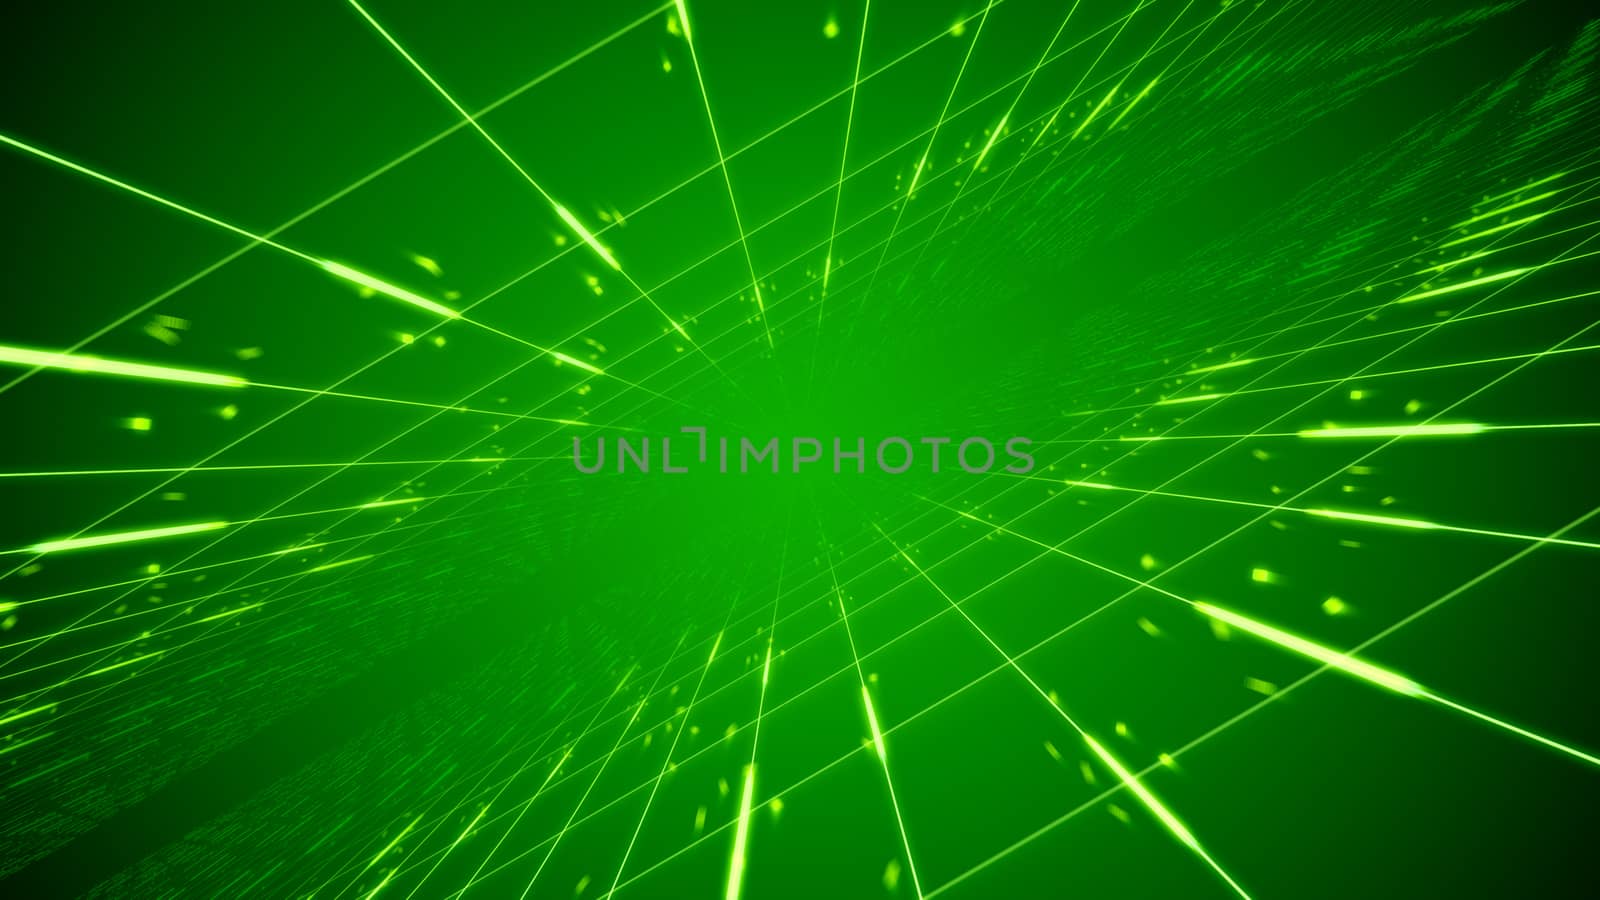 Striking 3d illustration of time portal from two moving surfaces covered with square nets and spinning dots in the green background. It generates the hi-tech mood of innovation.